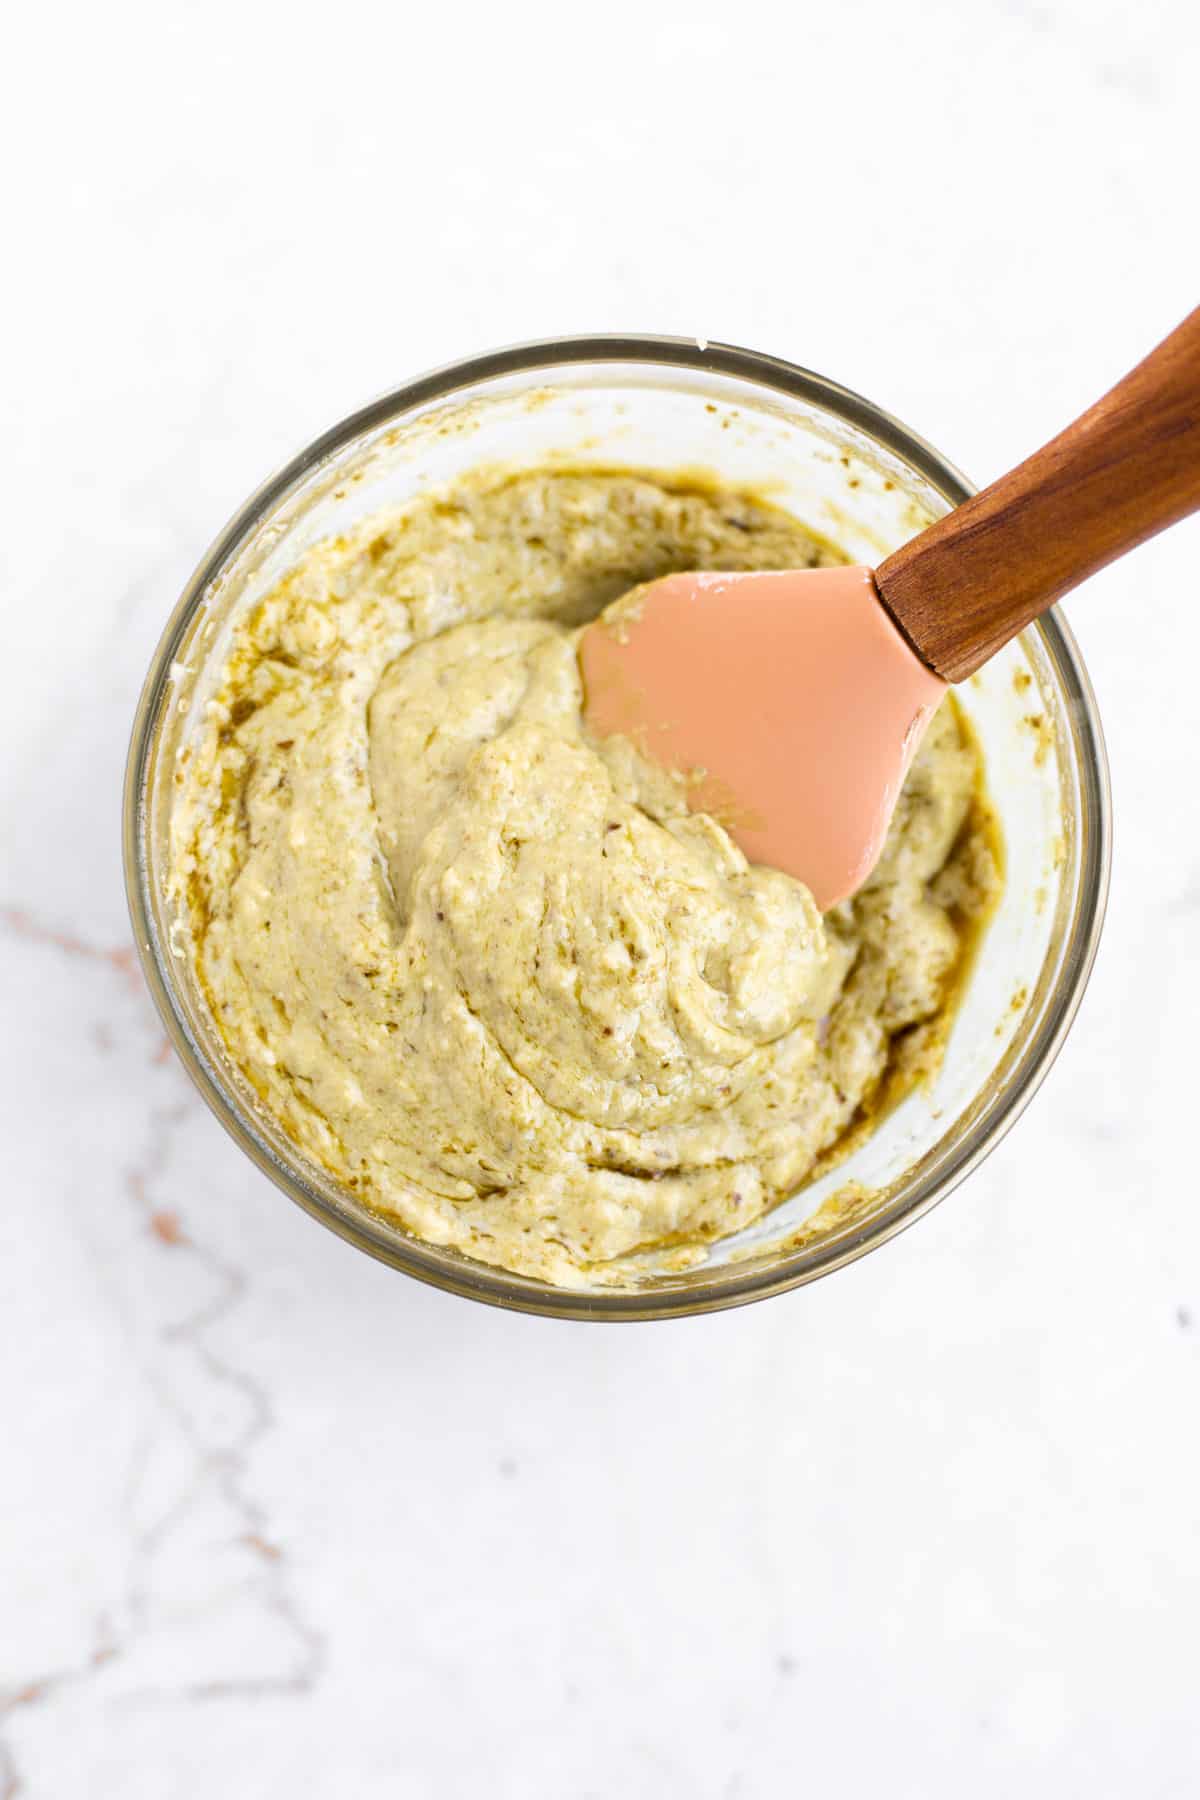 pesto mayo in a glass bowl with a small pink spatula.